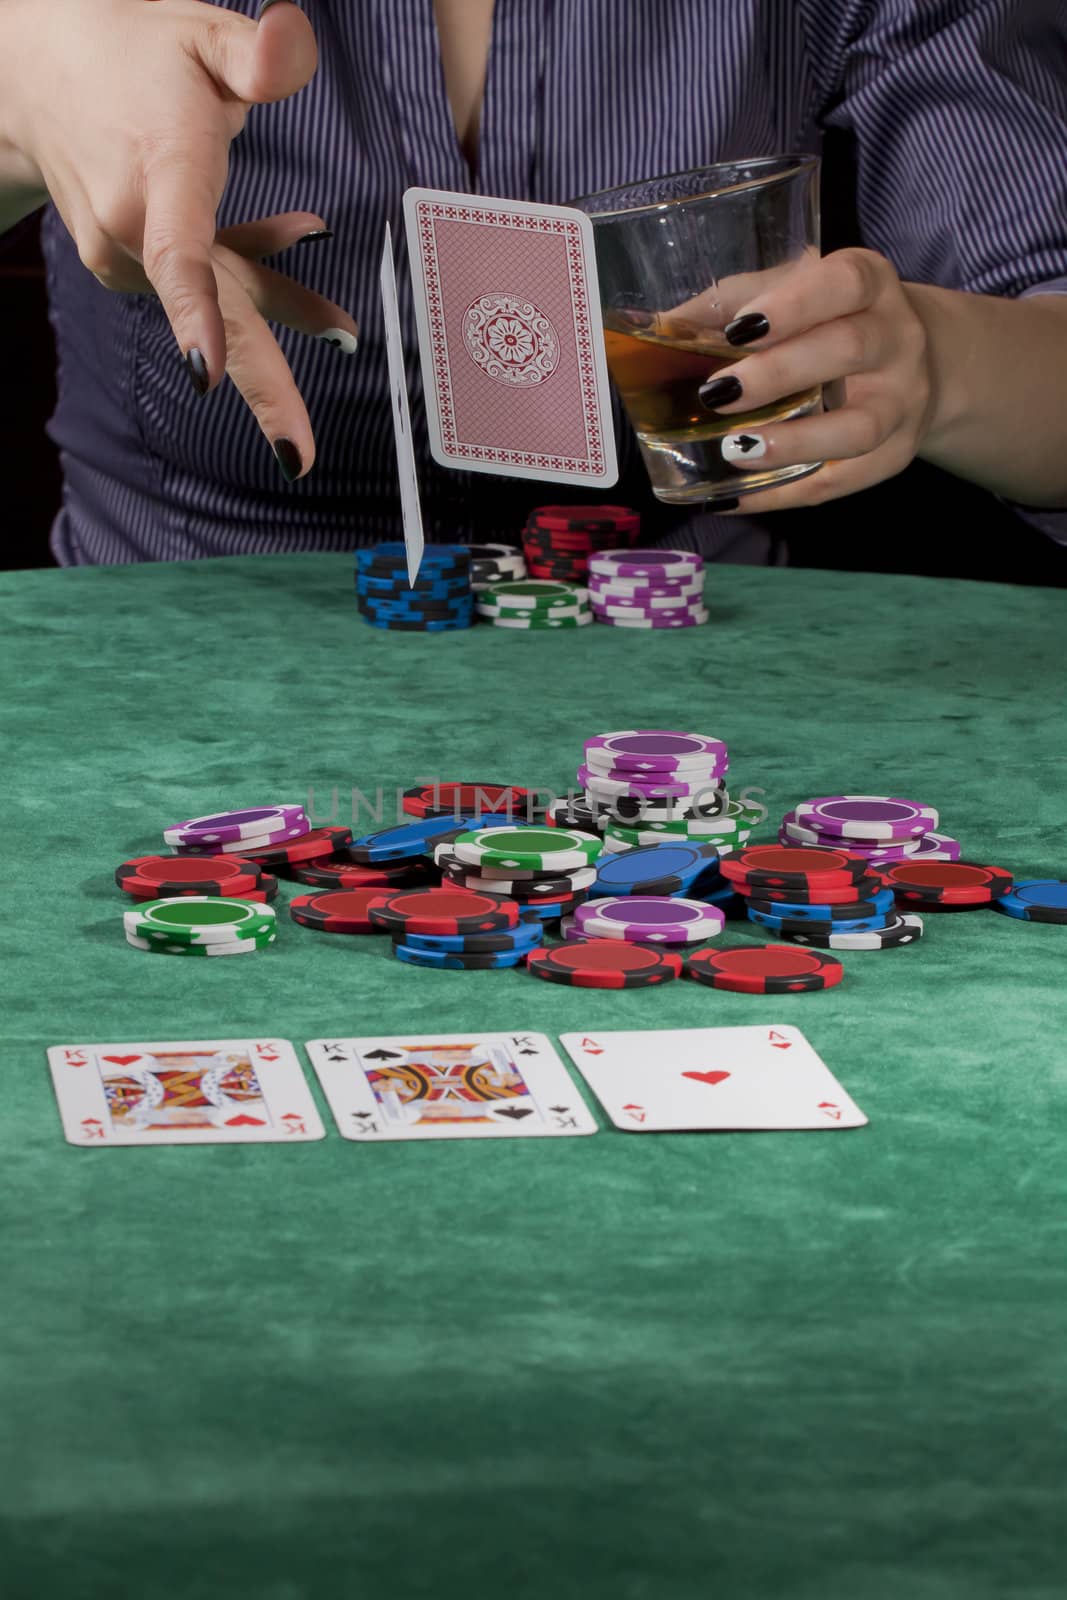 Woman dropping her cards in a poker game.